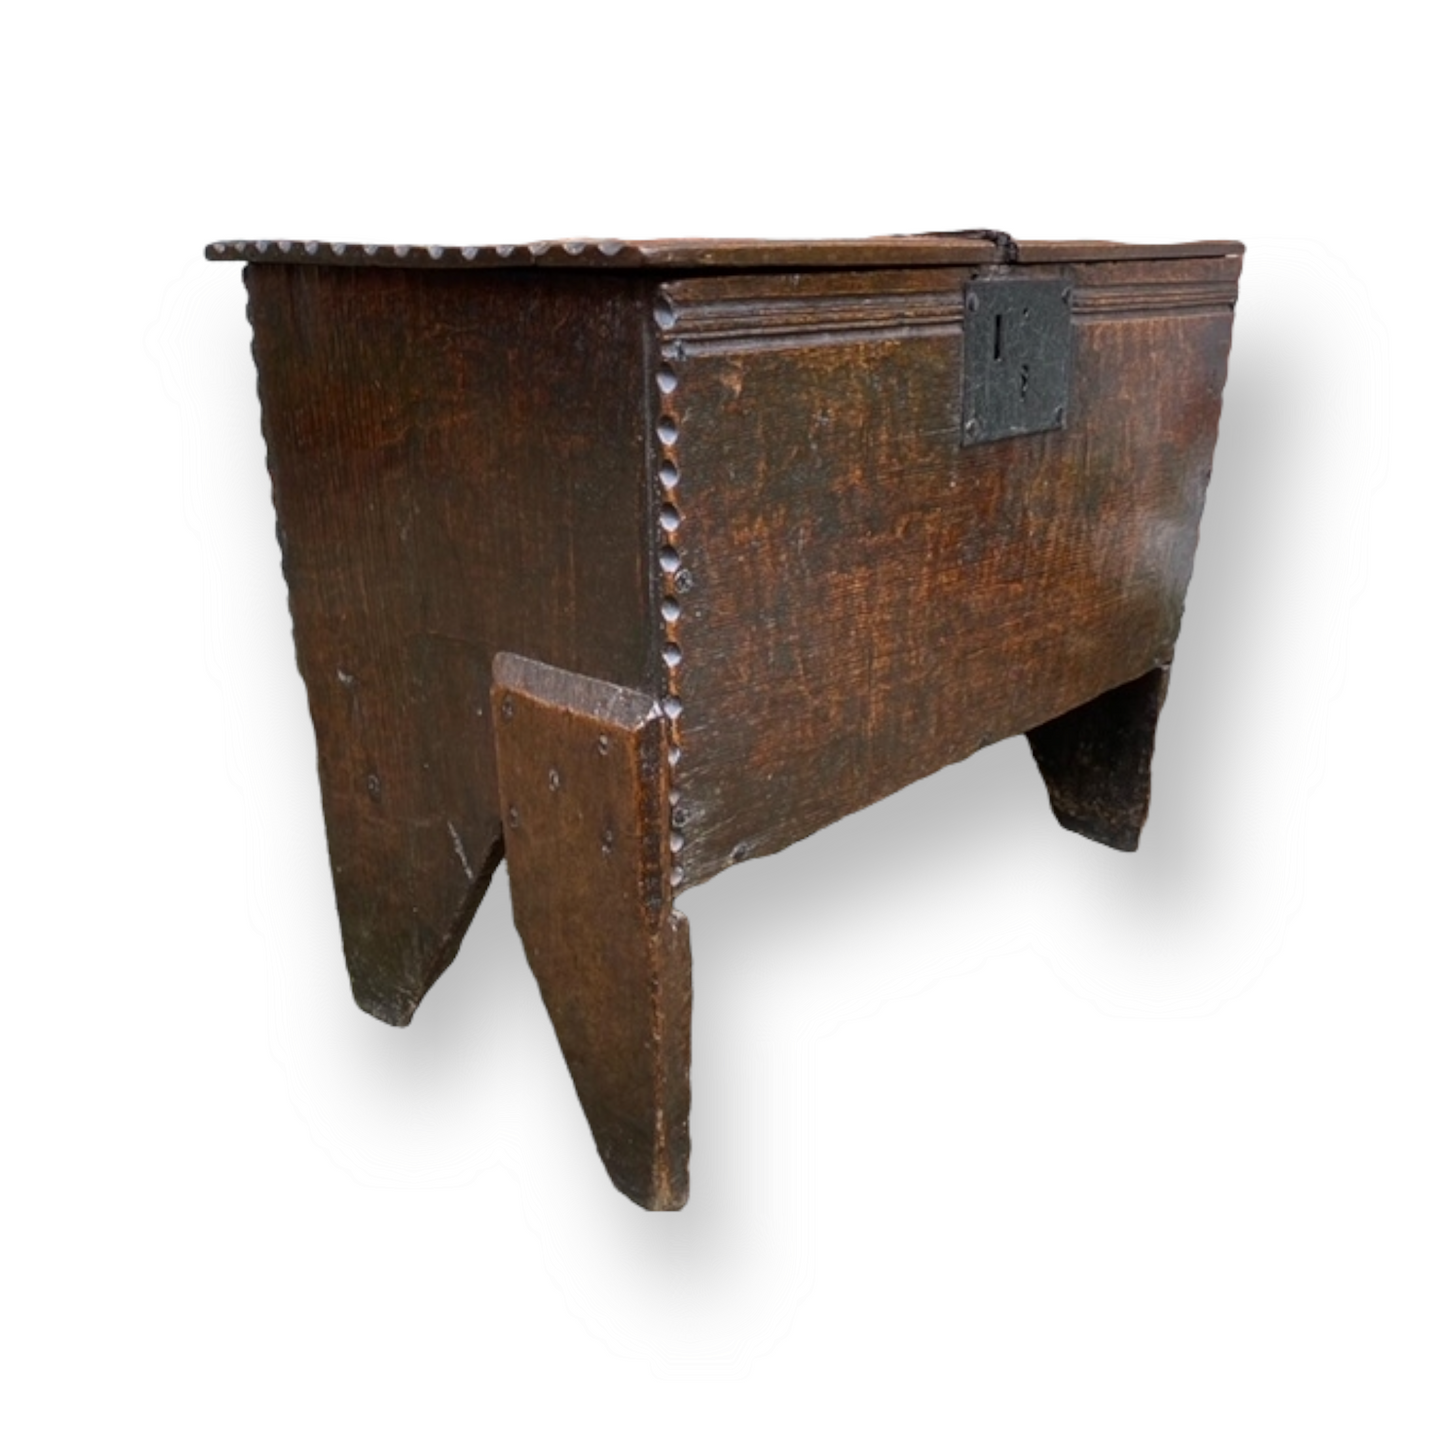 A Diminutive Early 17th Century English Antique Oak Six-Plank Child's Chest or Coffer